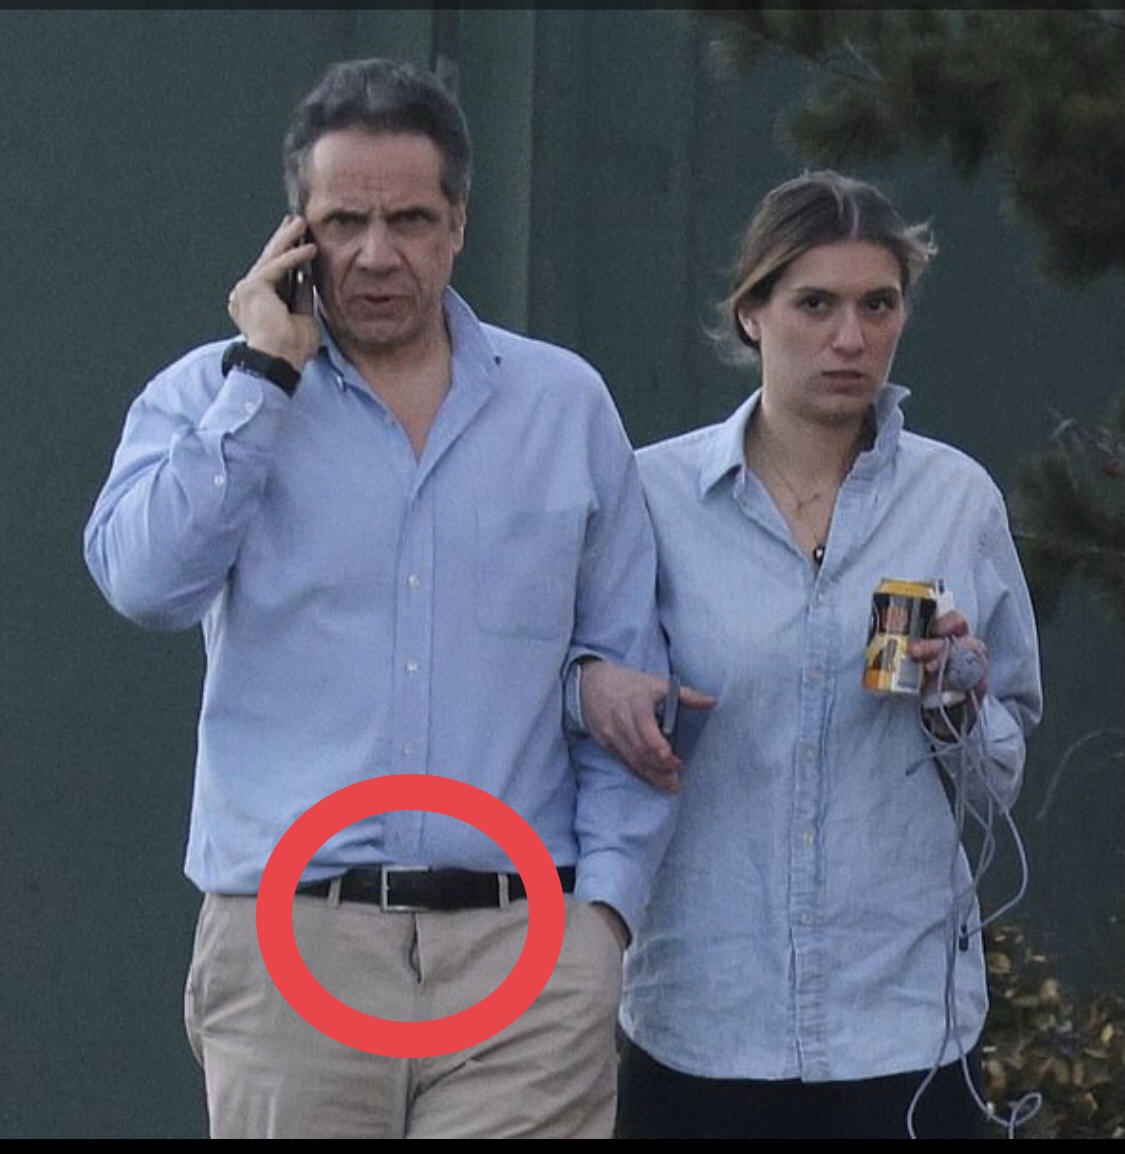 Cuomo walking with pants unzipped